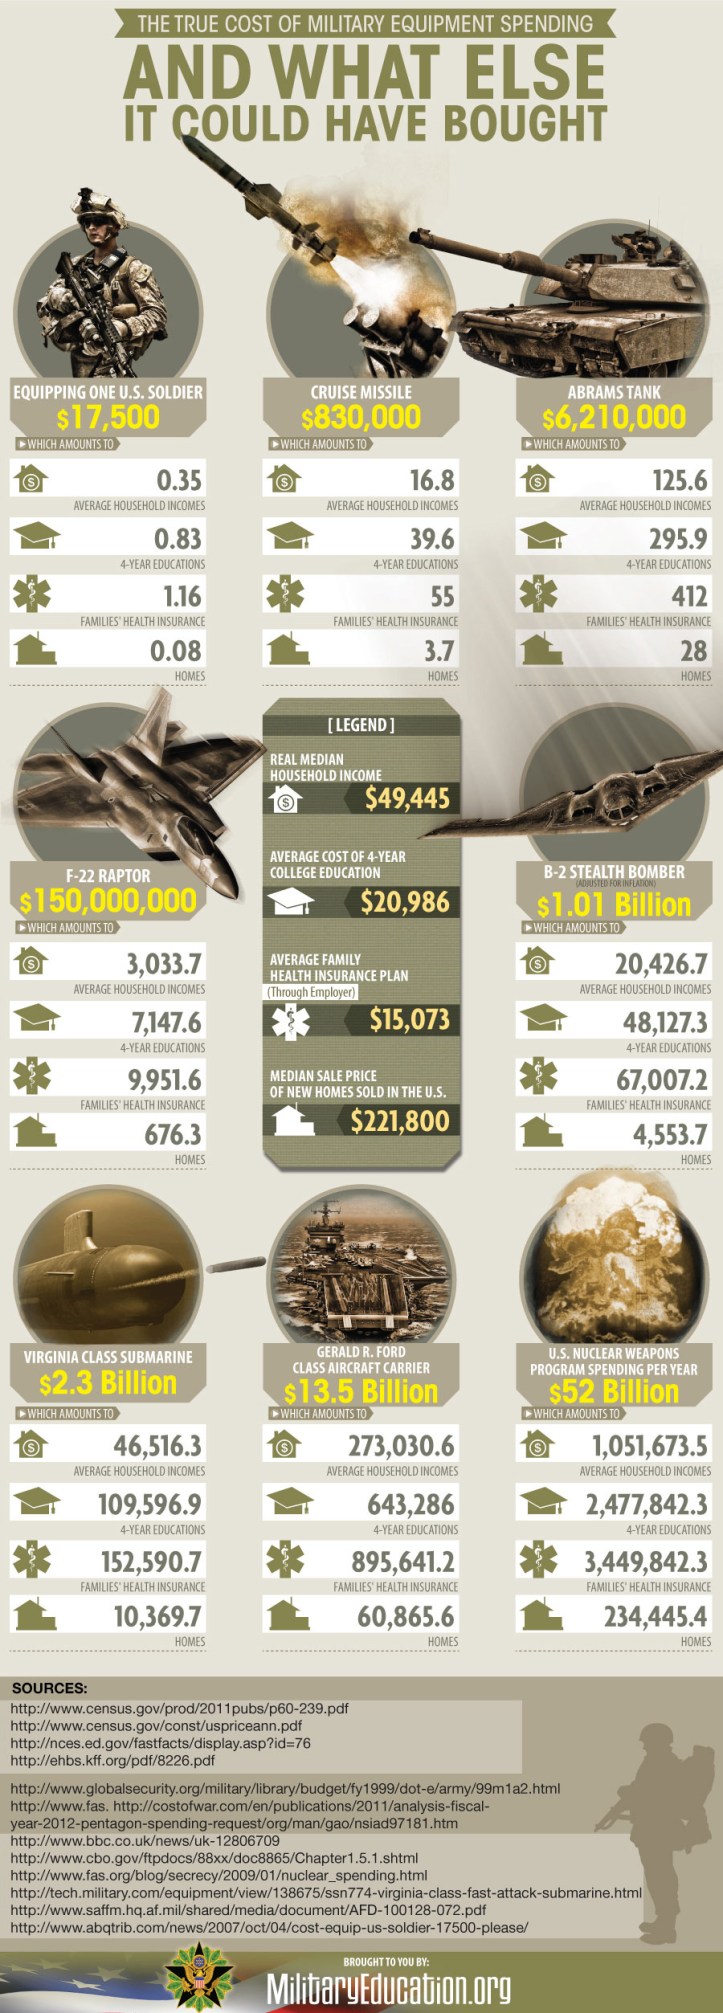 Graphic rendition of the cost of military spending for various weapons systems